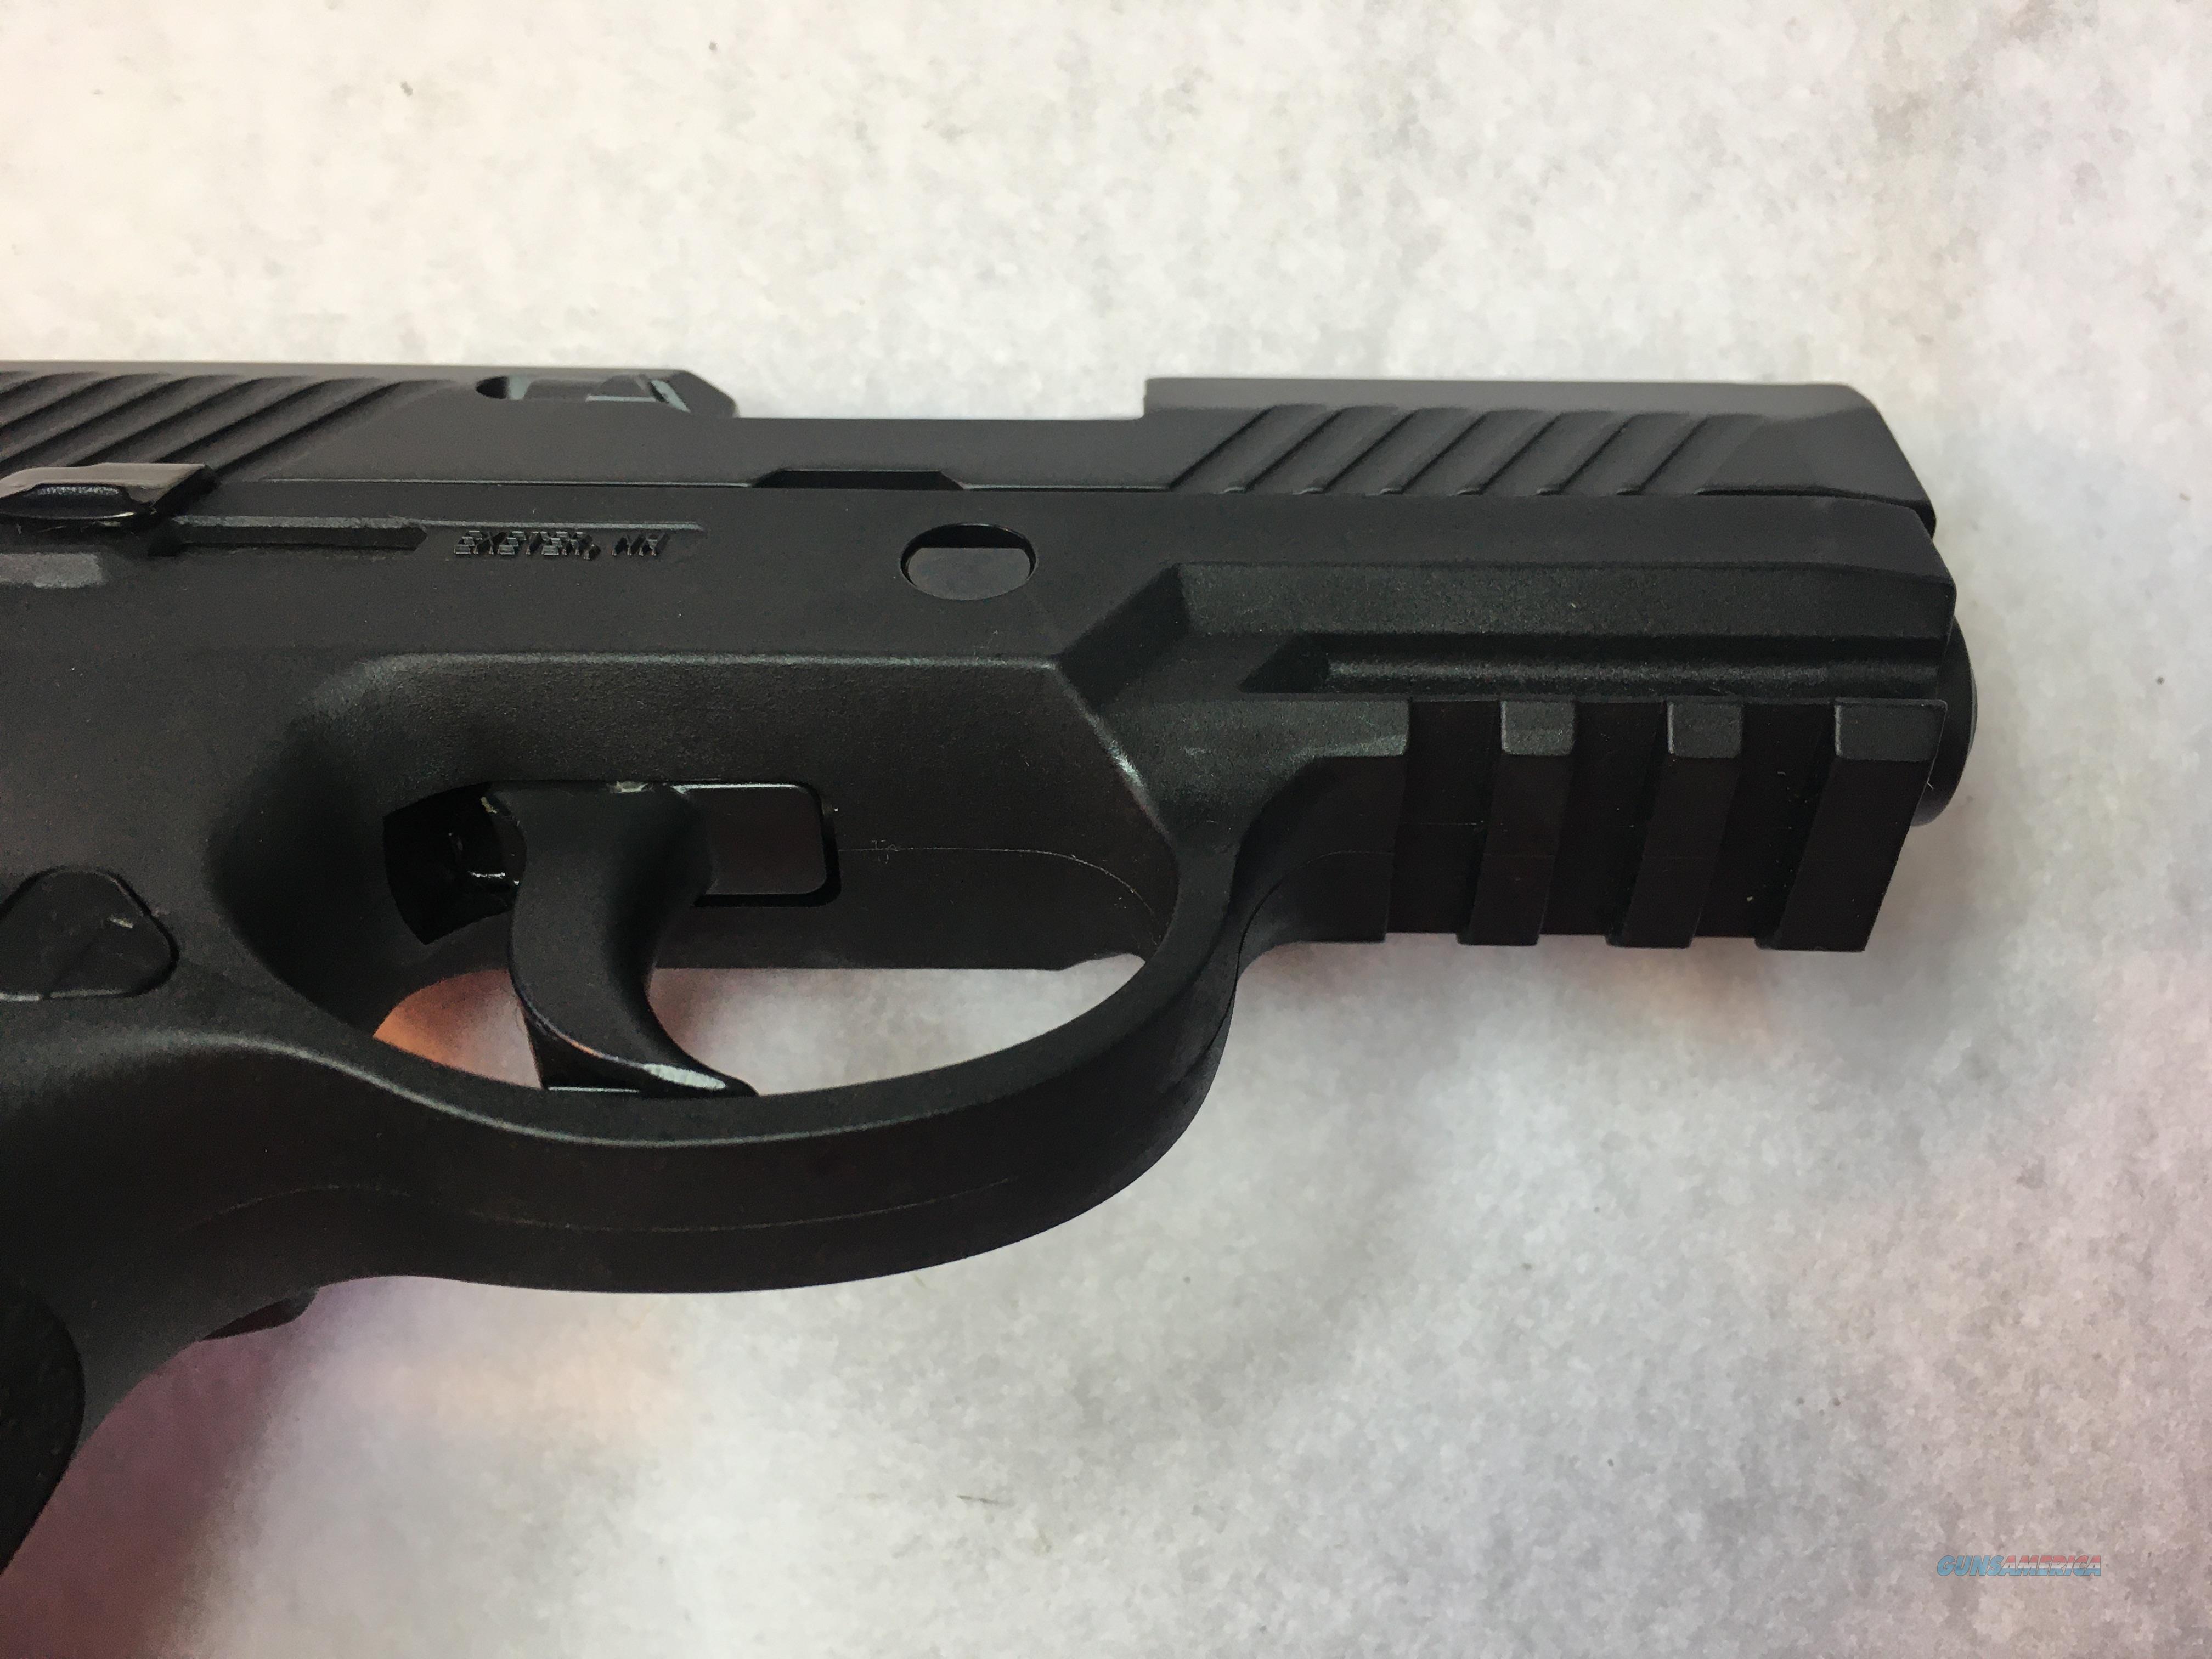 Sig Sauer P 320 Sub Compact 9mm For Sale At 984132510